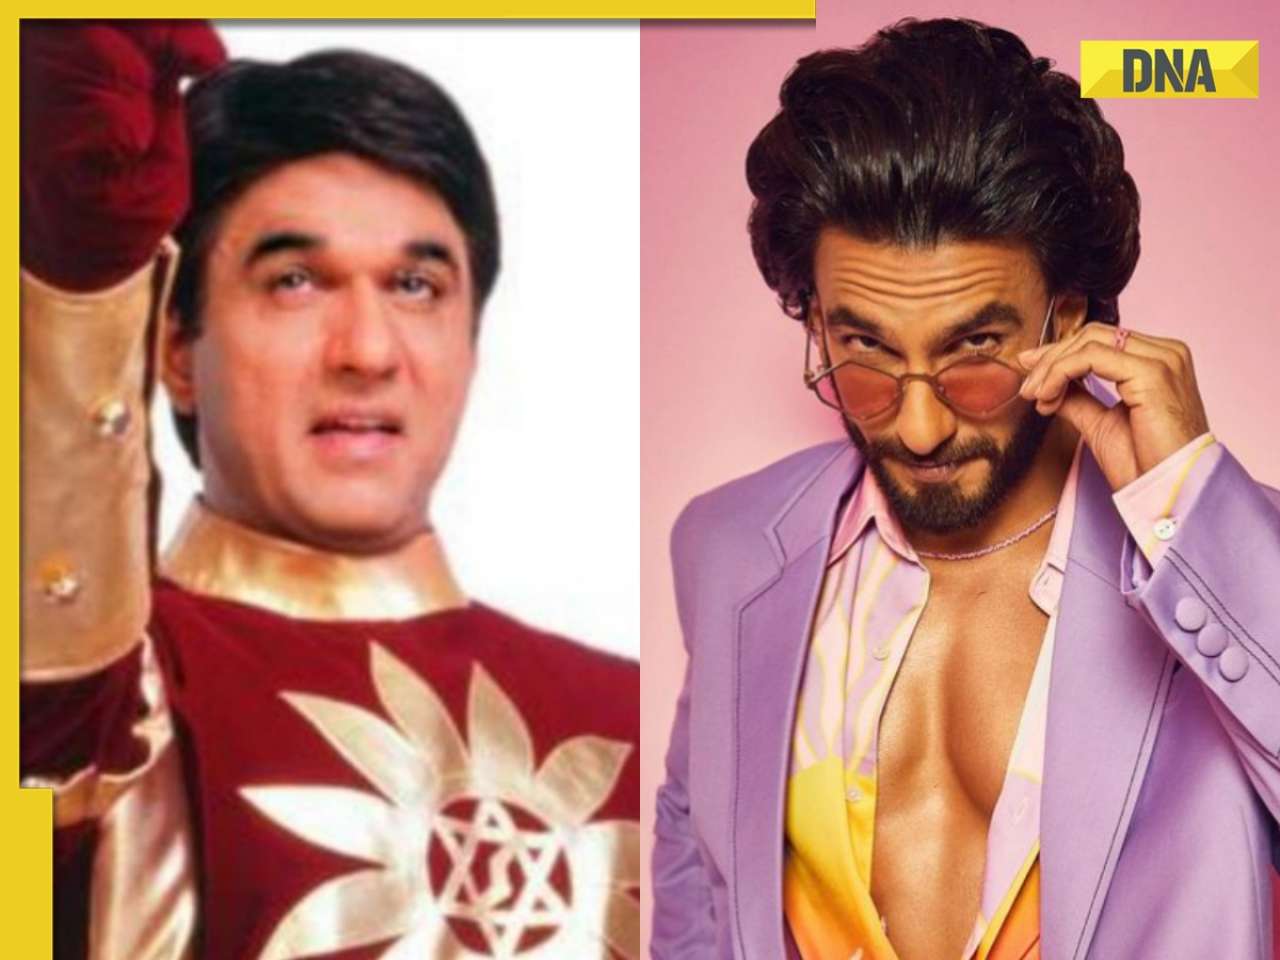 Mukesh Khanna posts angry message on reports of Ranveer Singh being cast as Shaktimaan, deletes hours later